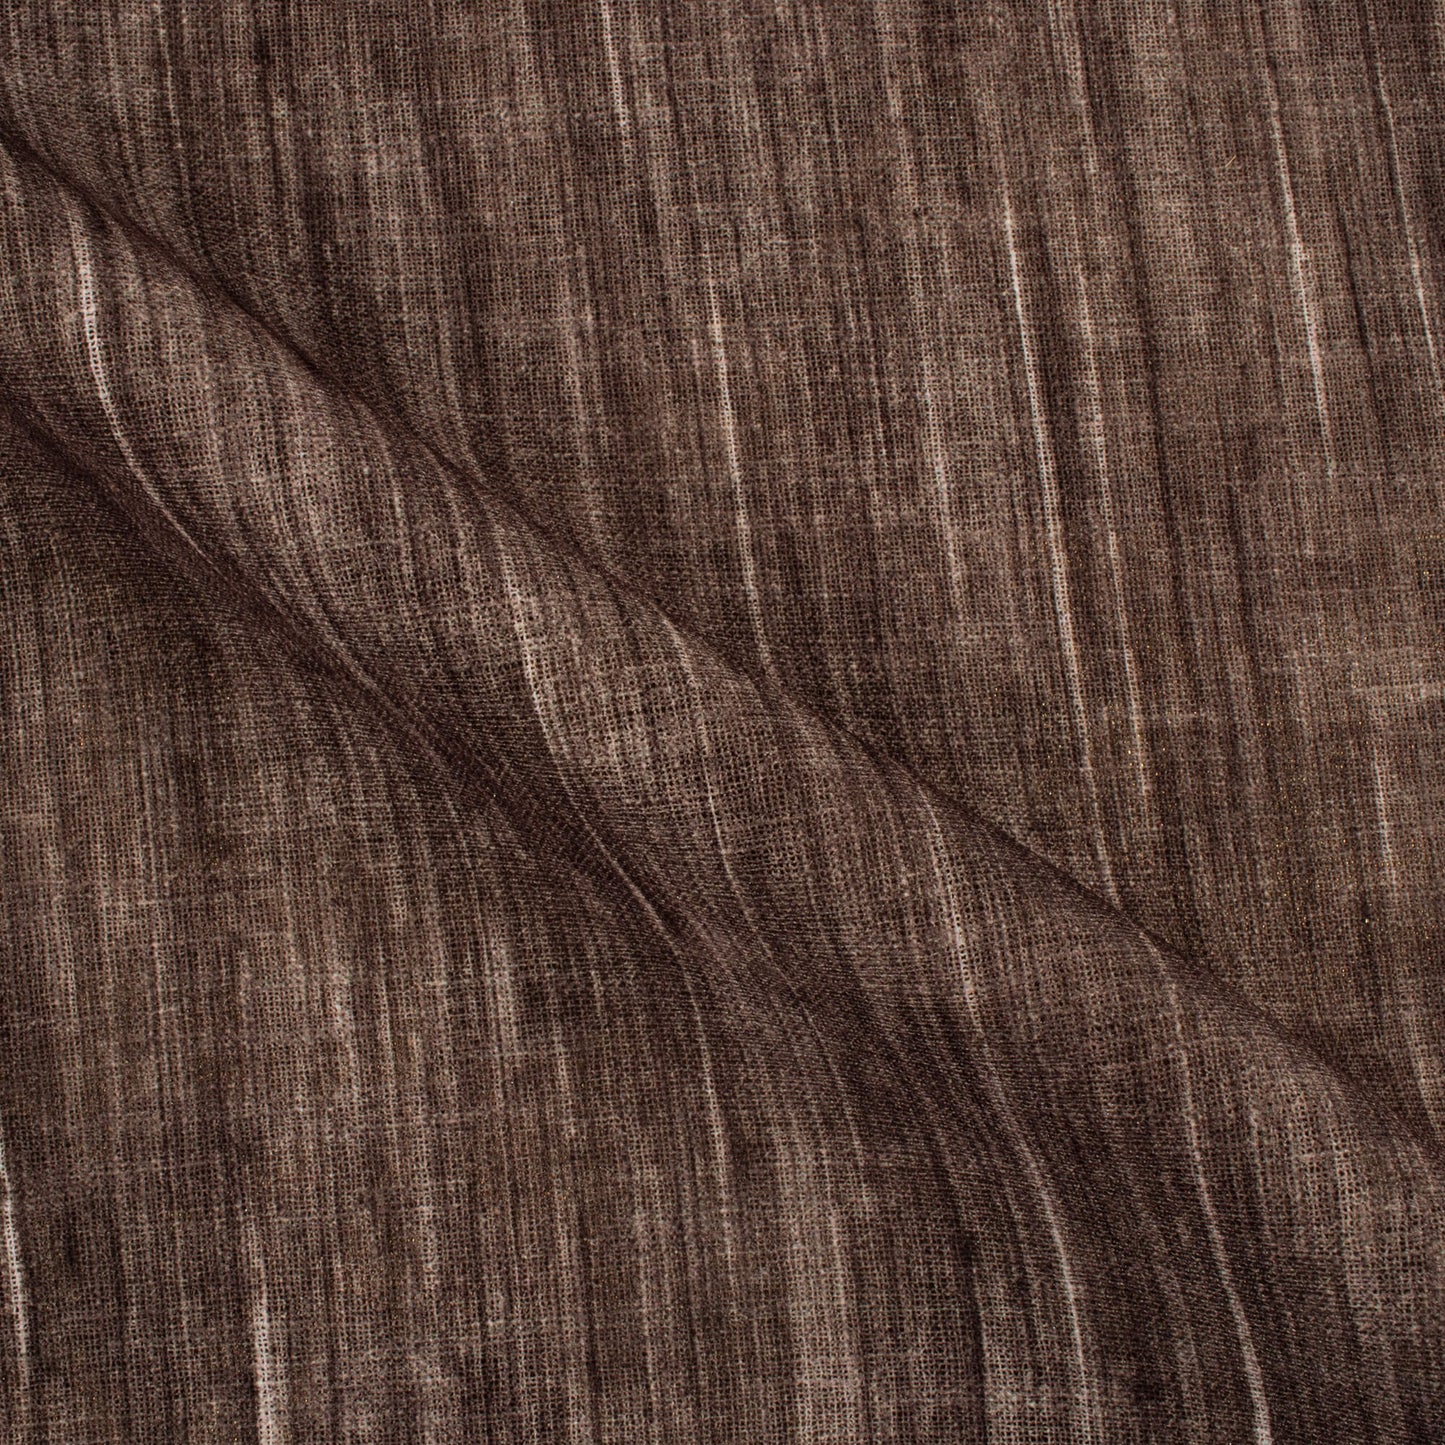 Umber Brown Textured Premium Sheer Fabric (Width 54 Inches)